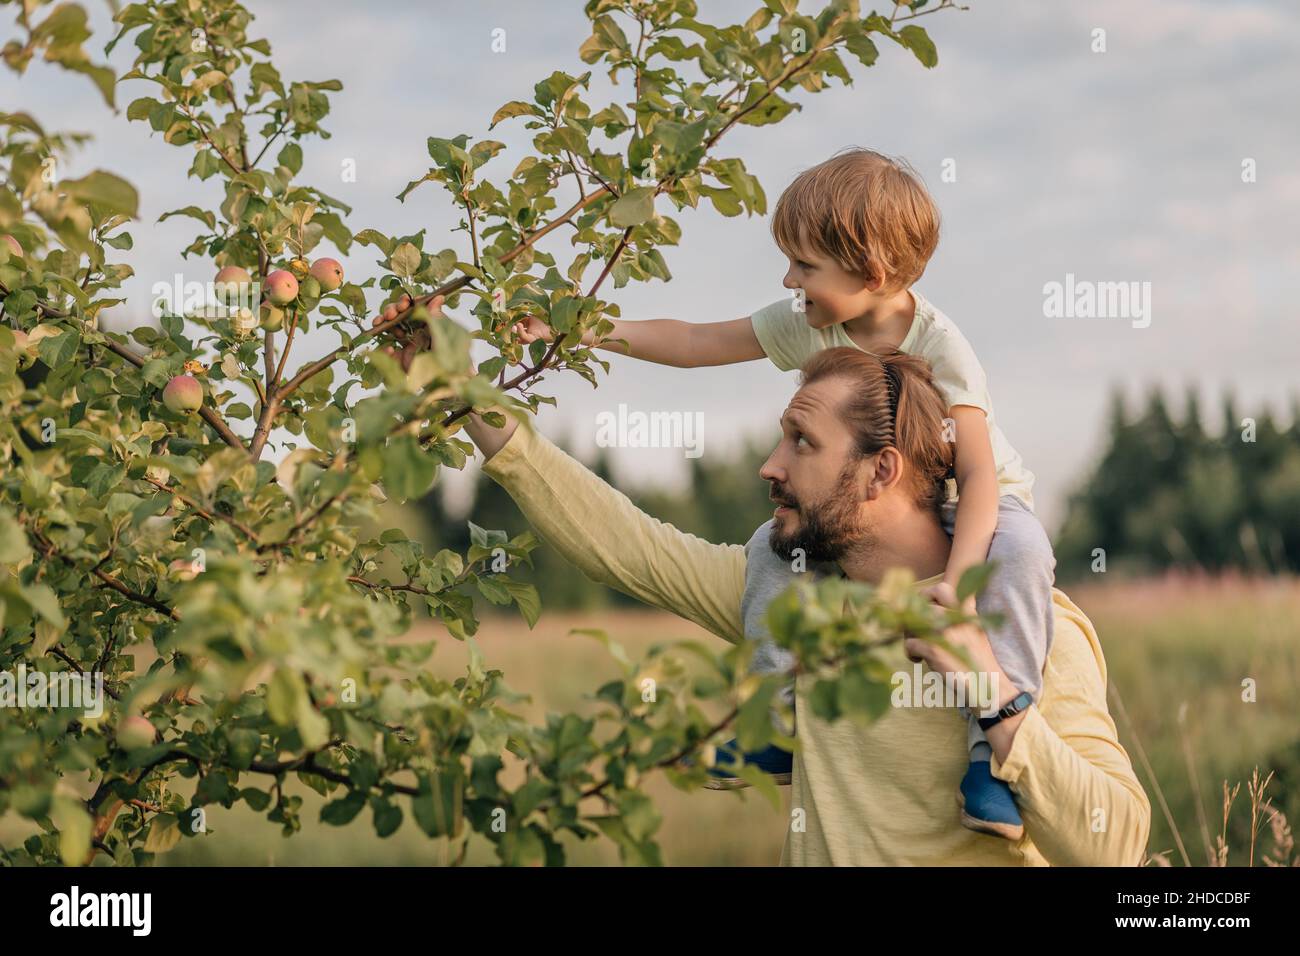 Family, father and son in village mischief pluck eat apple from tree. Stock Photo